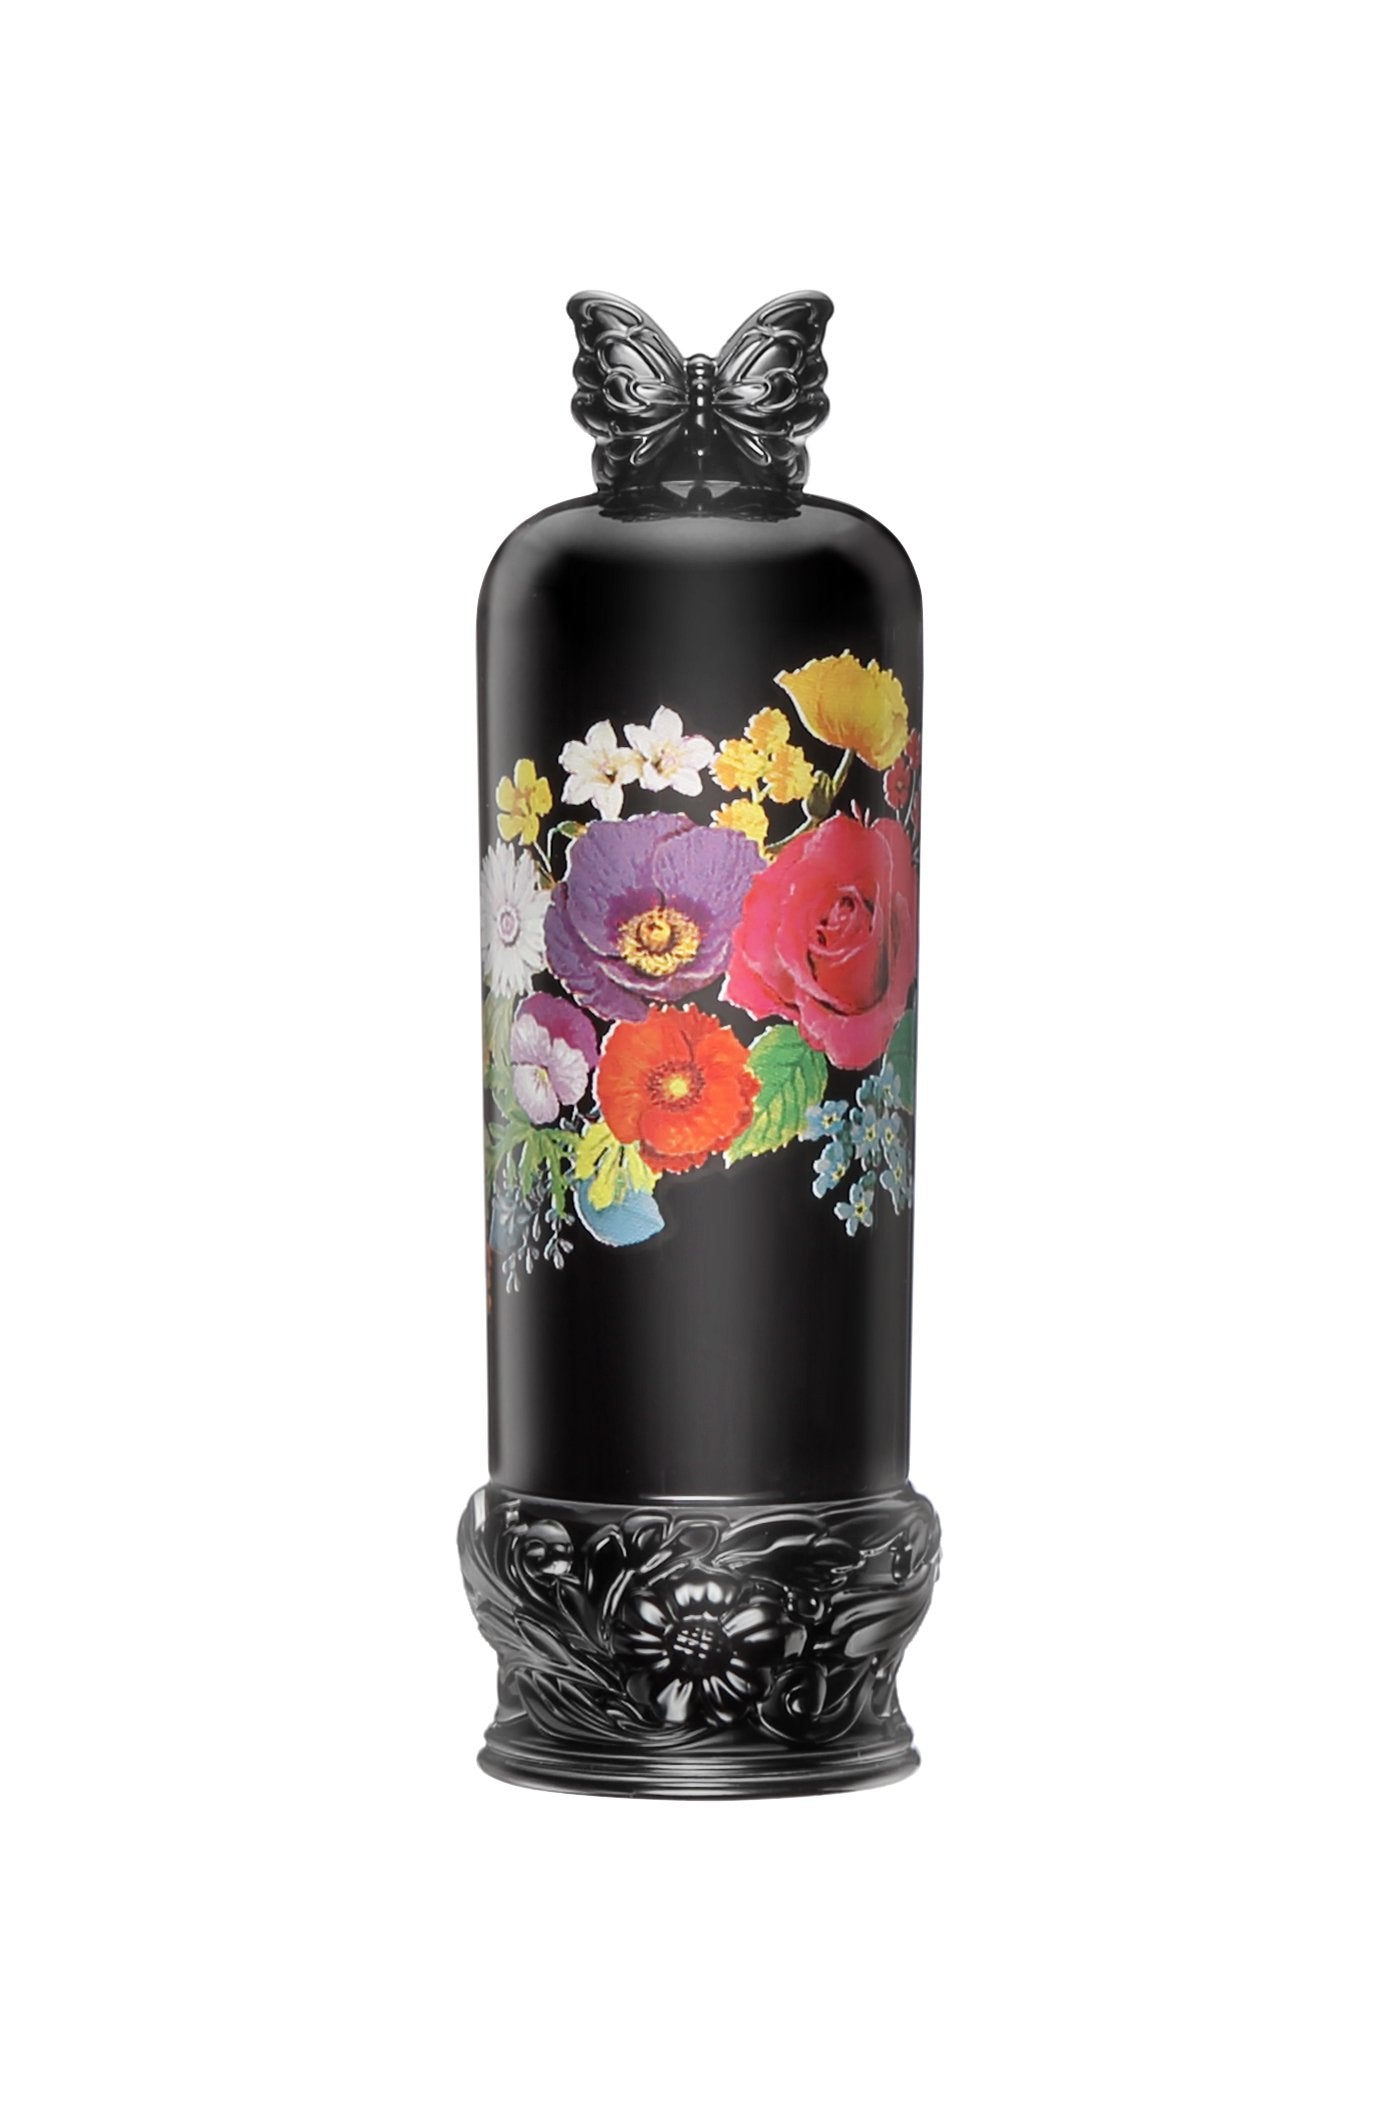 Closed, black cylindrical container, butterfly on top, large base, engraved floral design, cap with colorful floral design